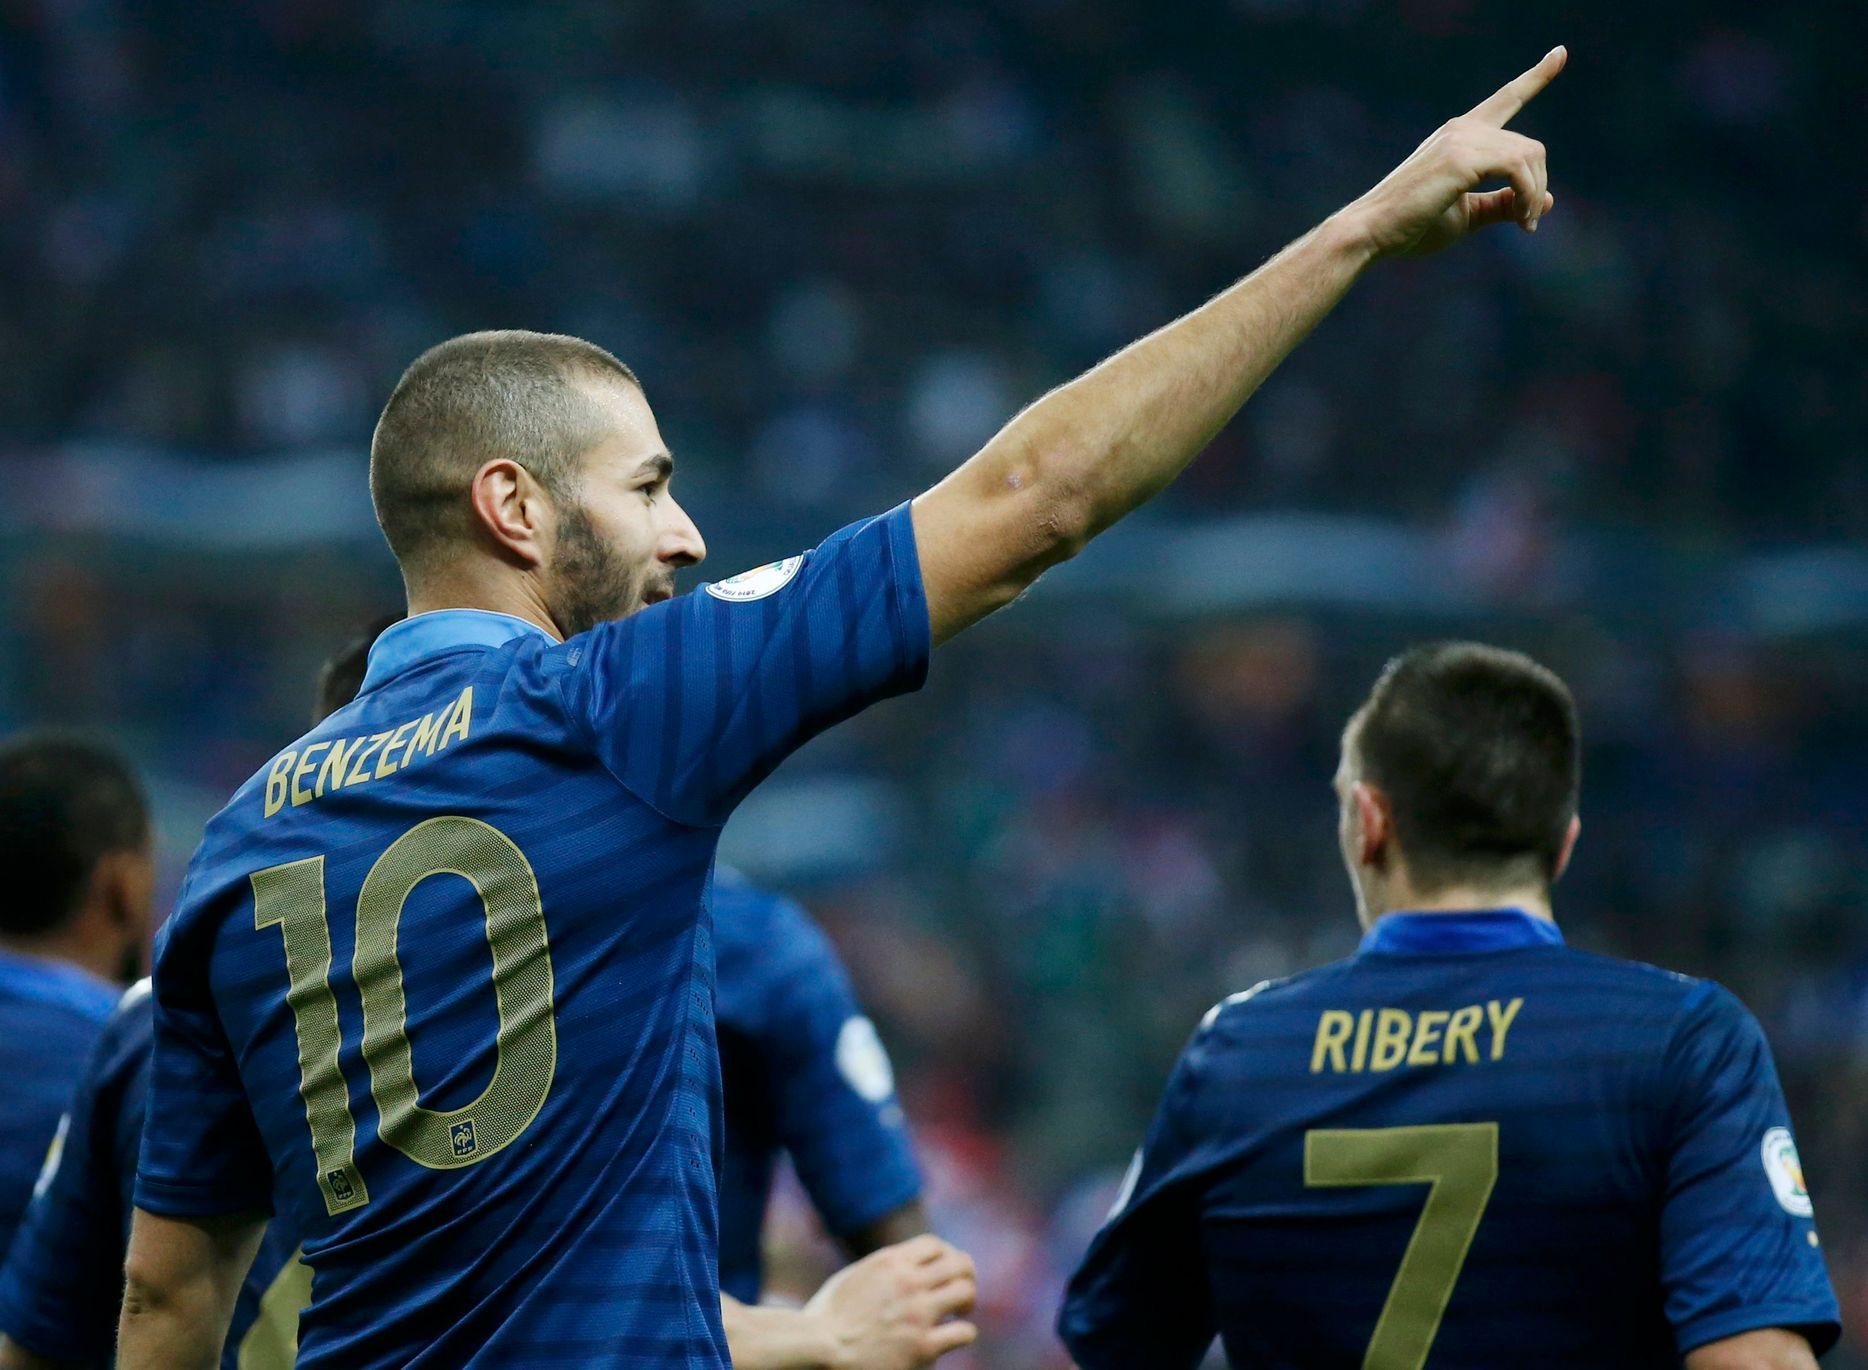 France's Benzema celebrates after scoring against Finland during the 2014 World Cup qualifying soccer match at the Stade de France stadium in Saint-Denis